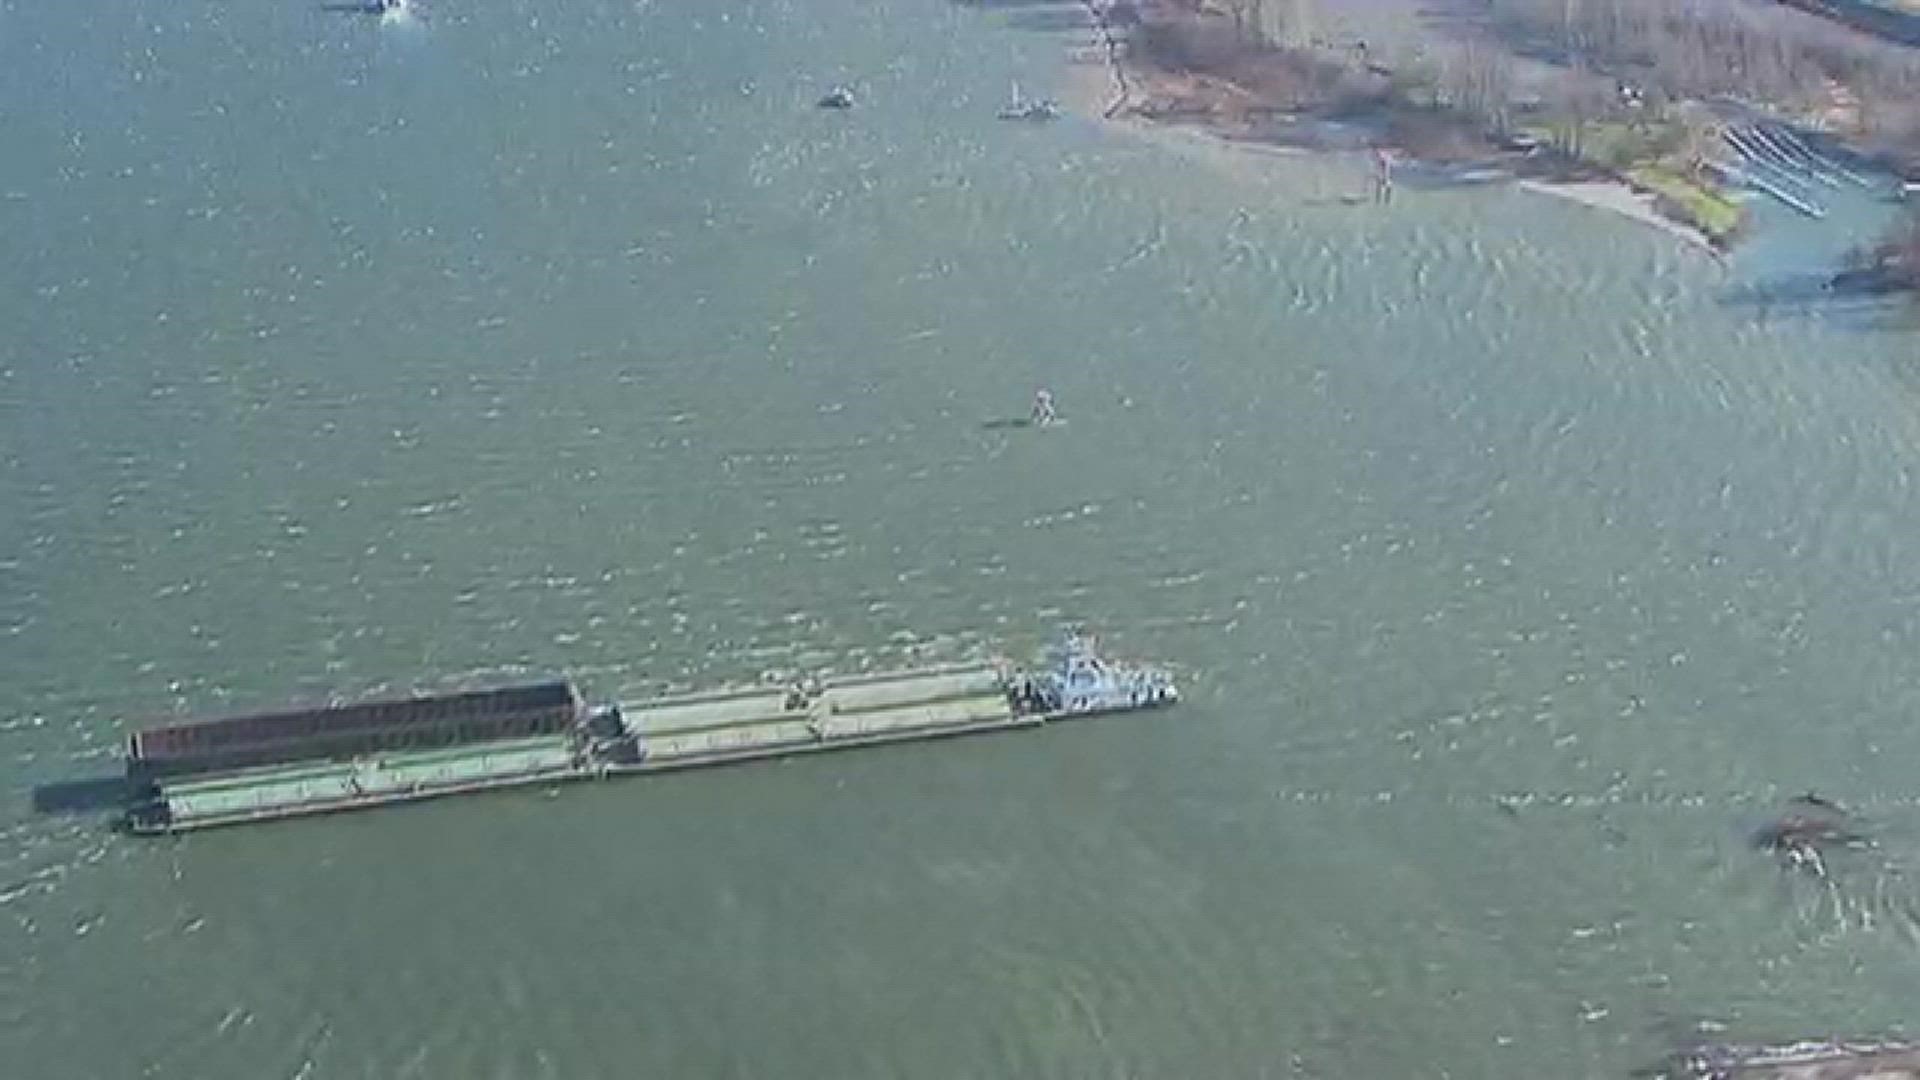 A Tidewater tug hauling three grain barges and one empty bin barge ran aground after being pushed by heavy winds.